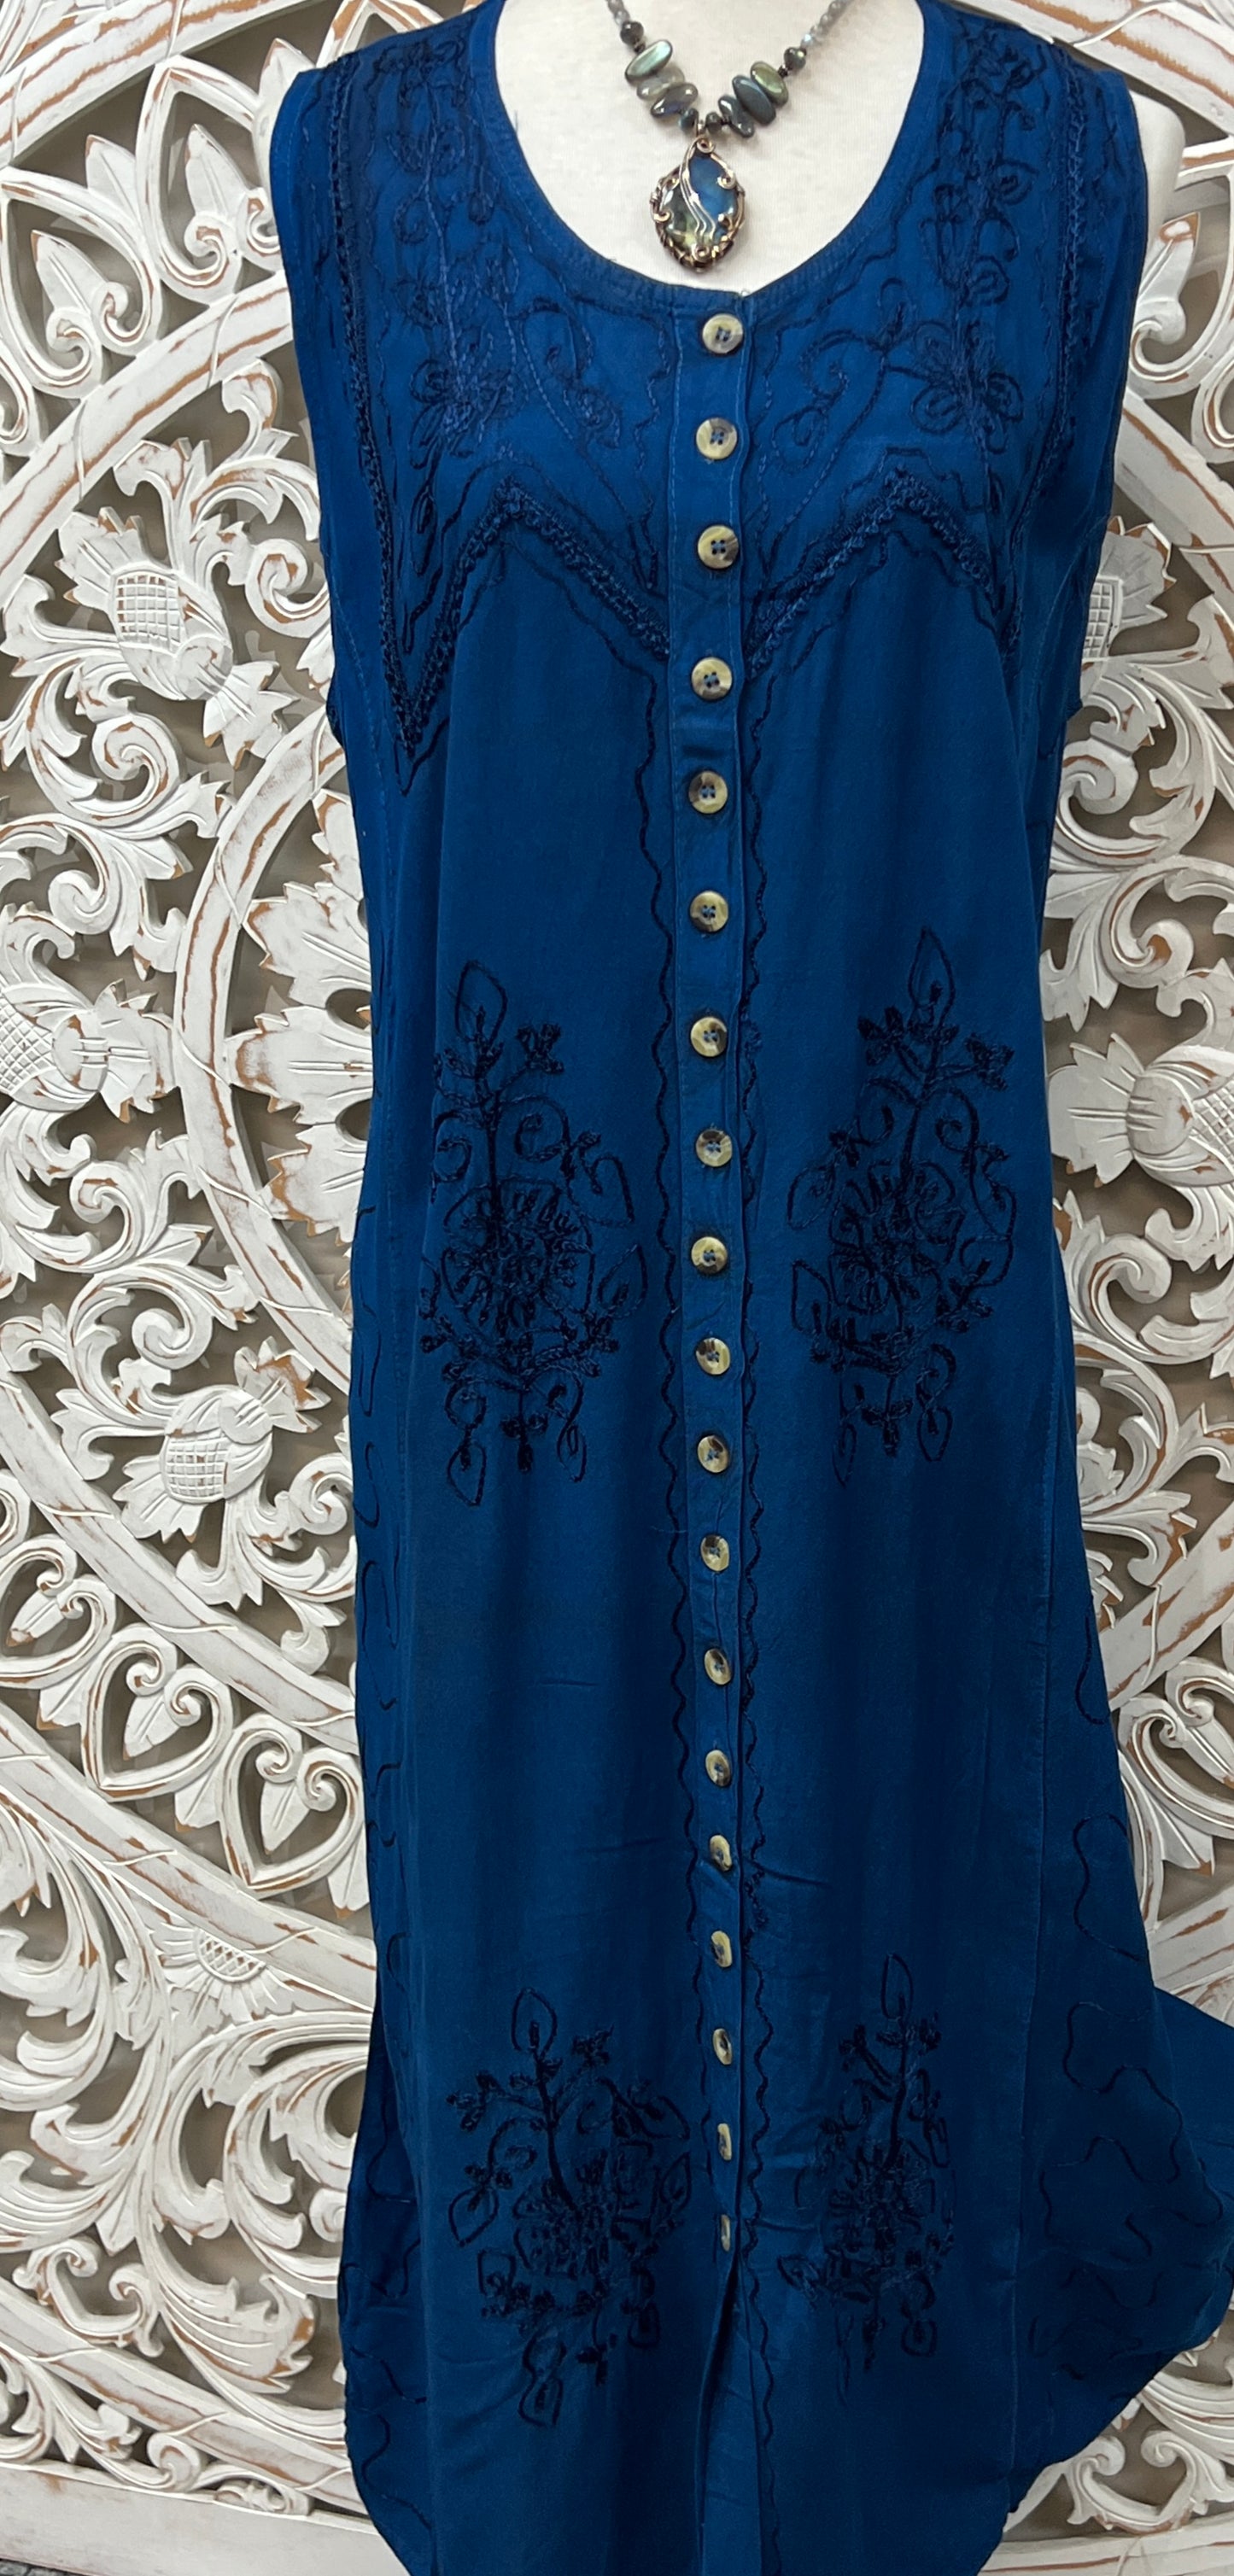 Embroidered Sleeveless Button up Dress